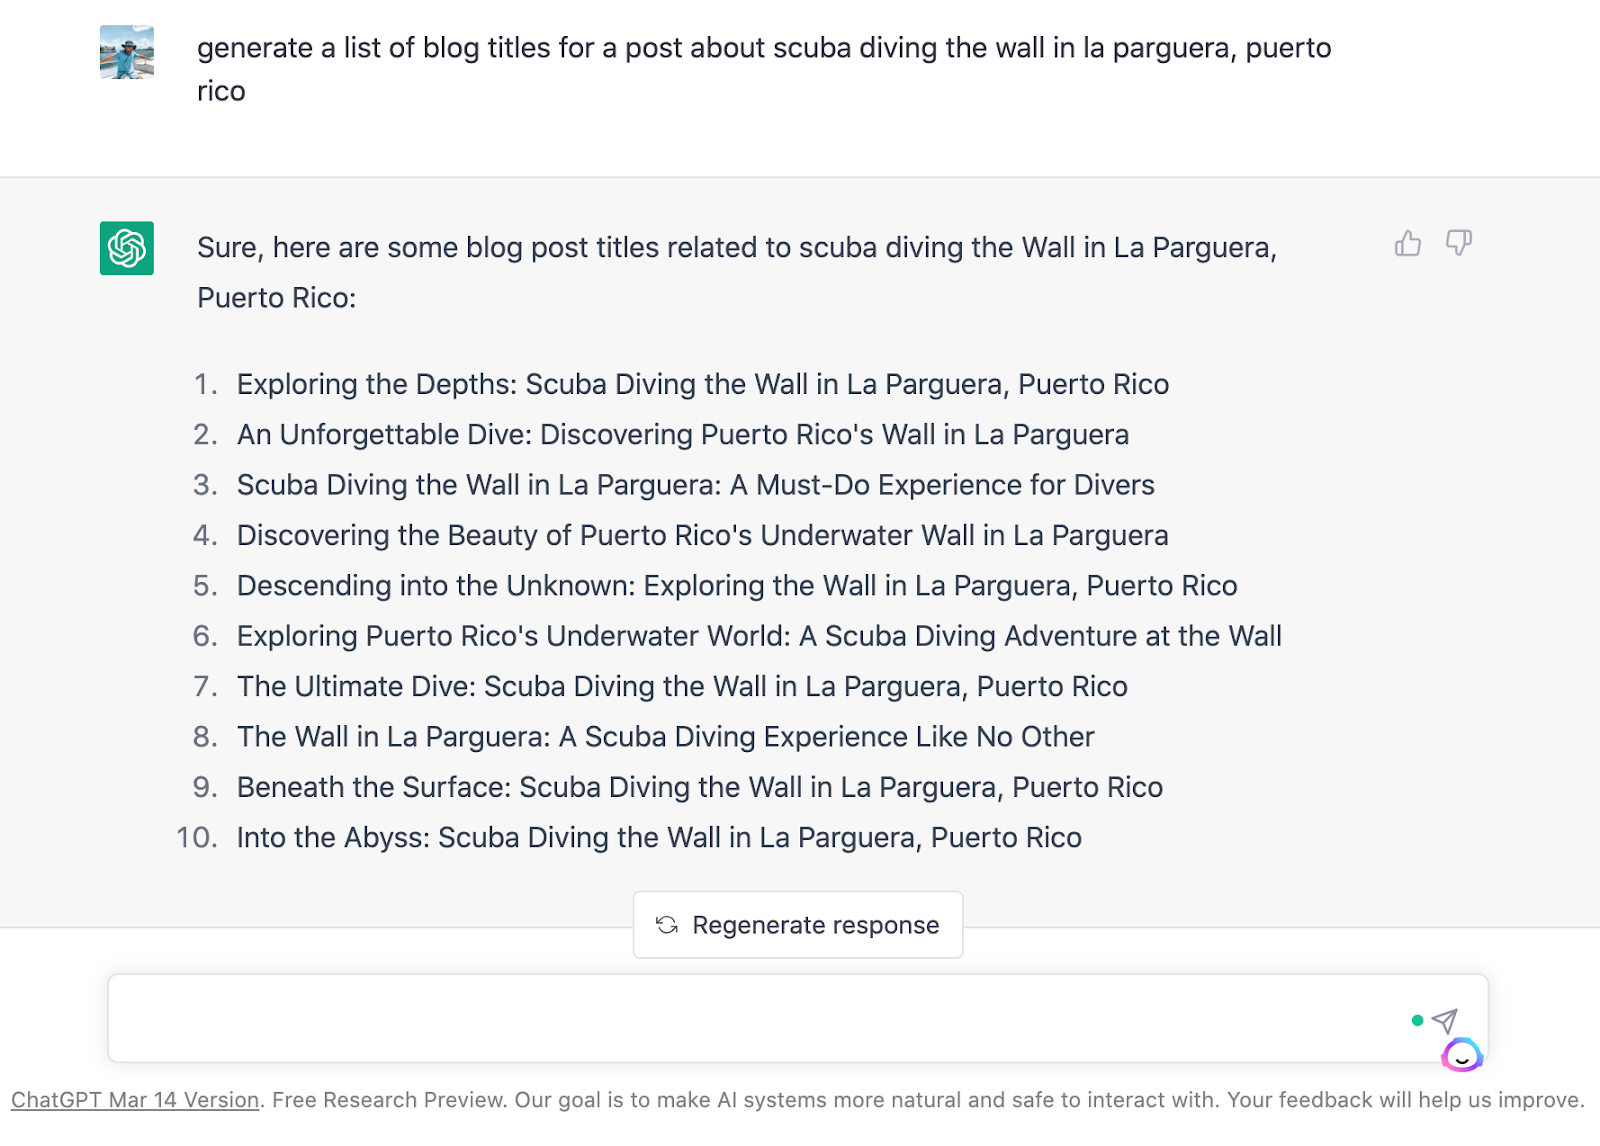 The image displays the ChatGPT interface where the author of this article asks the technology to produce a list of blog titles about scuba diving in La Parguera, Puerto Rico. Again, ChatGPT generates ten quality ideas for blog titles about the topic.